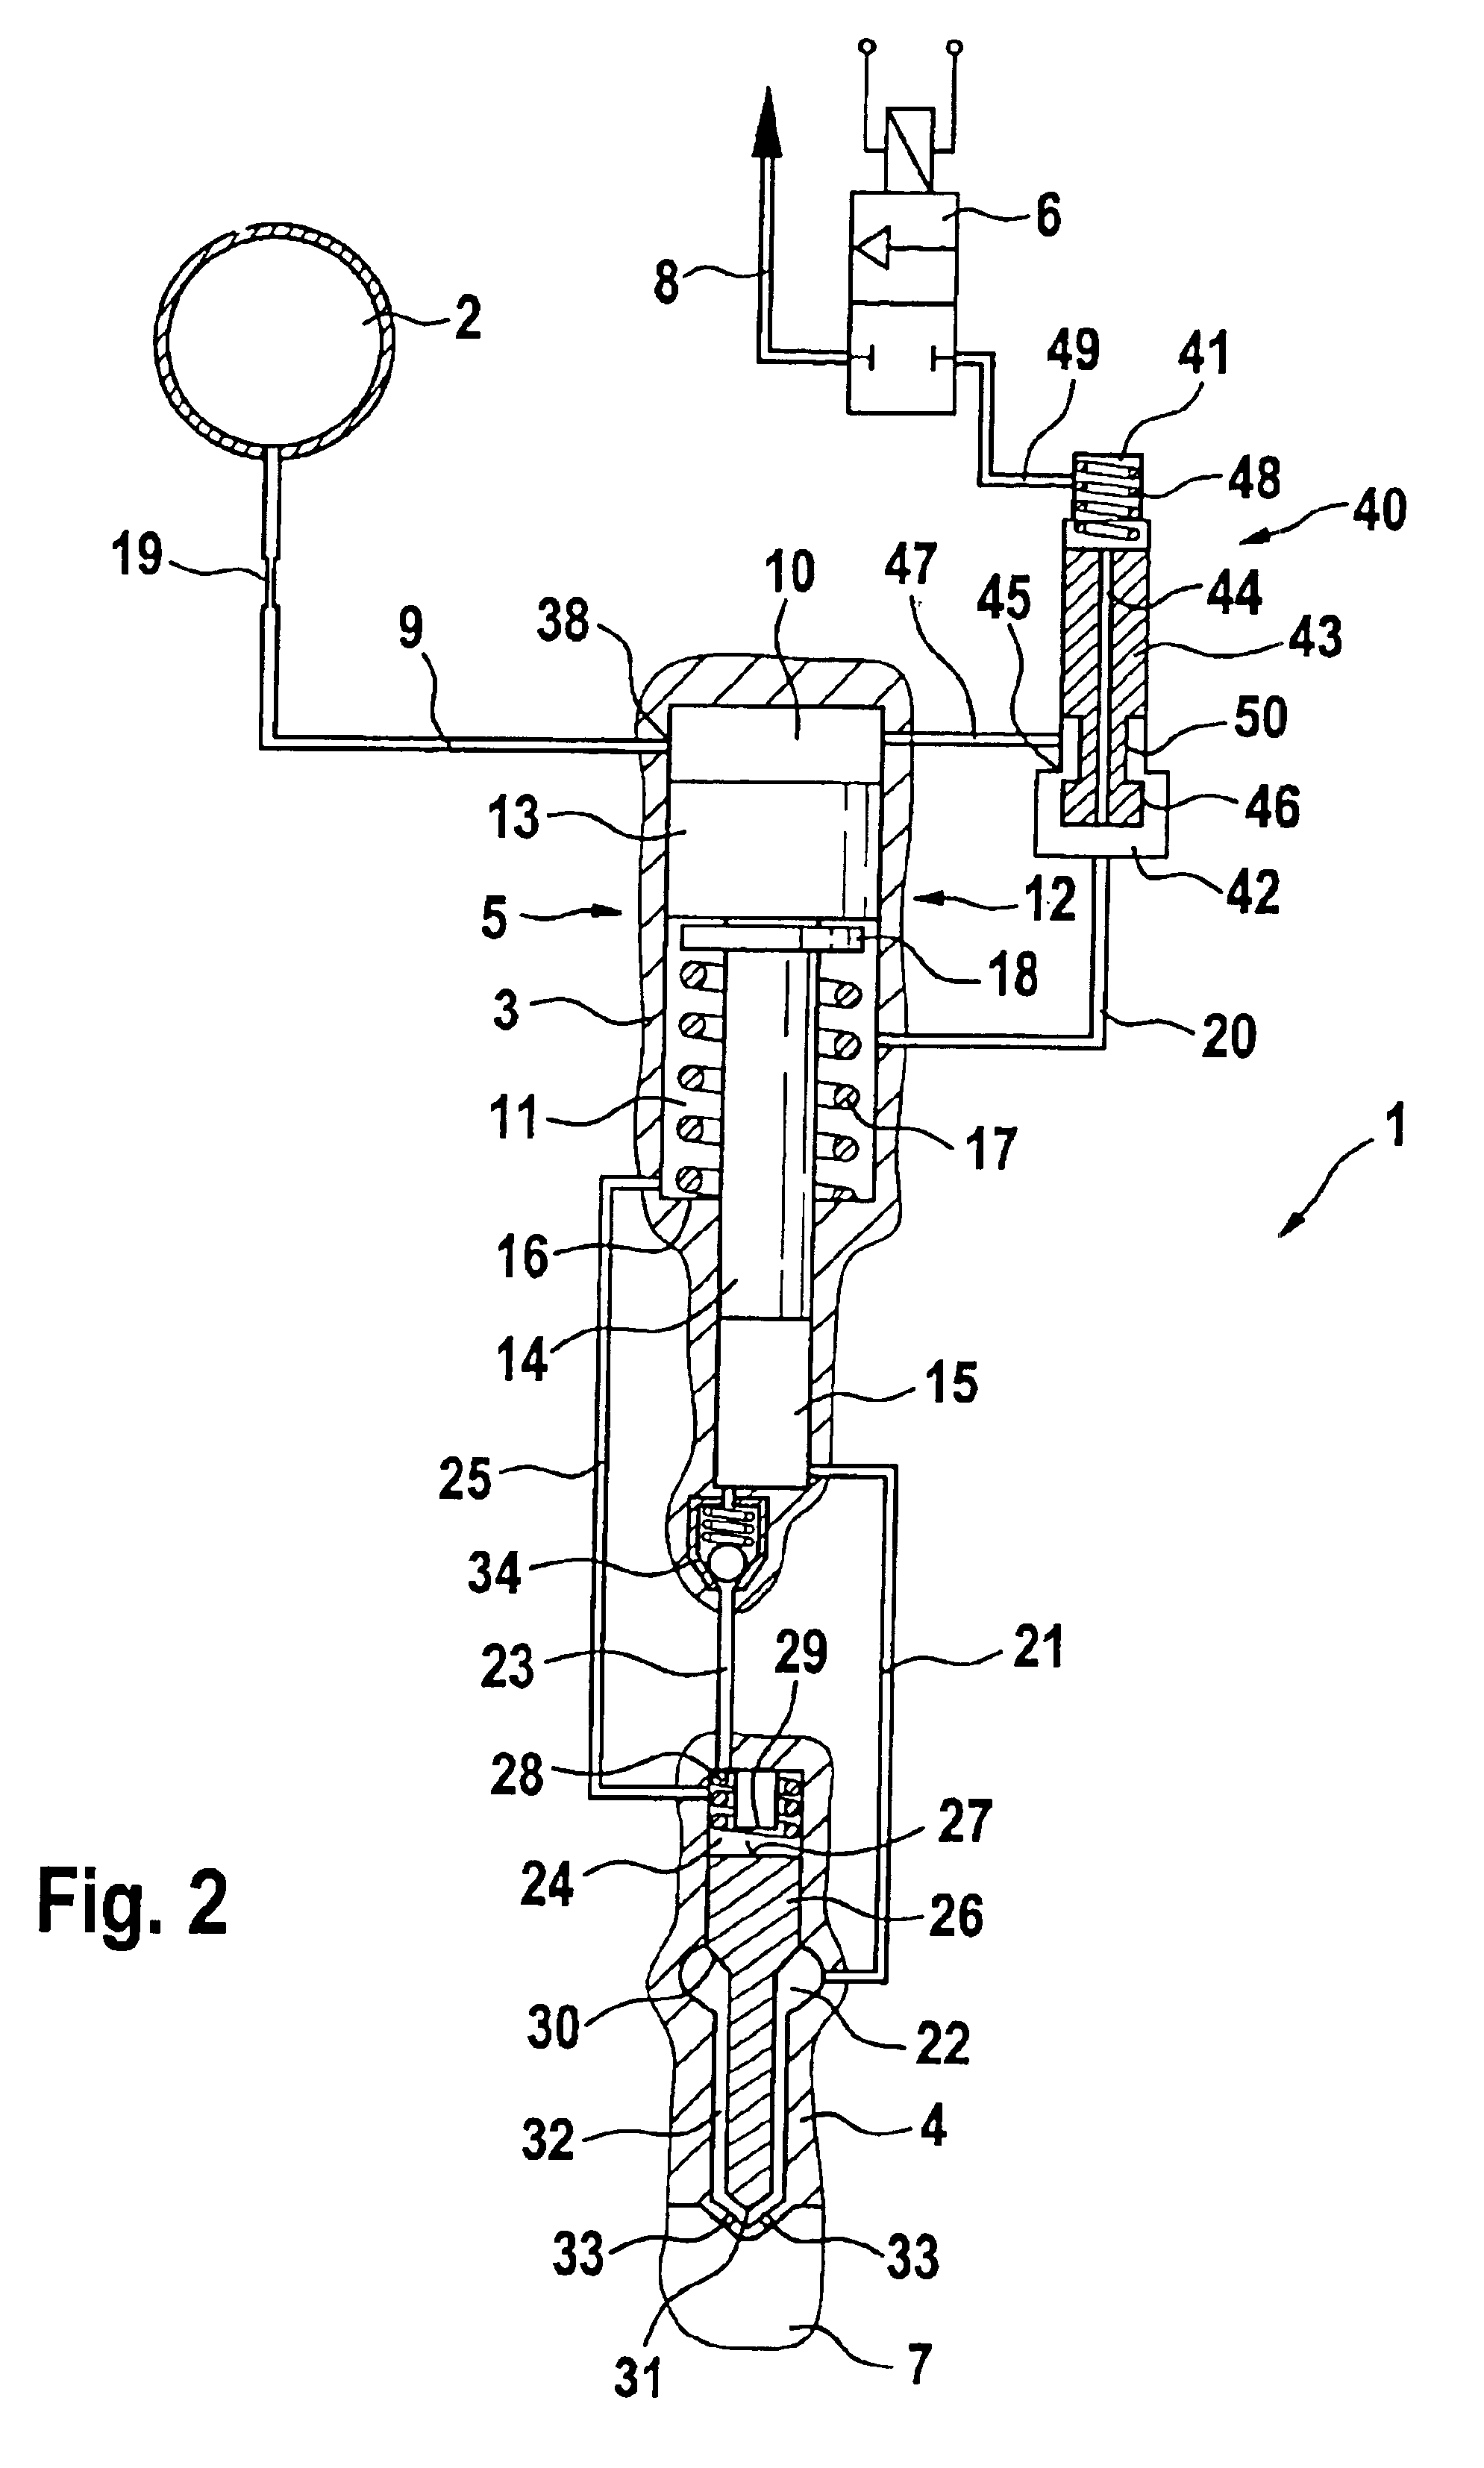 Boosted fuel injector with rapid pressure reduction at end of injection